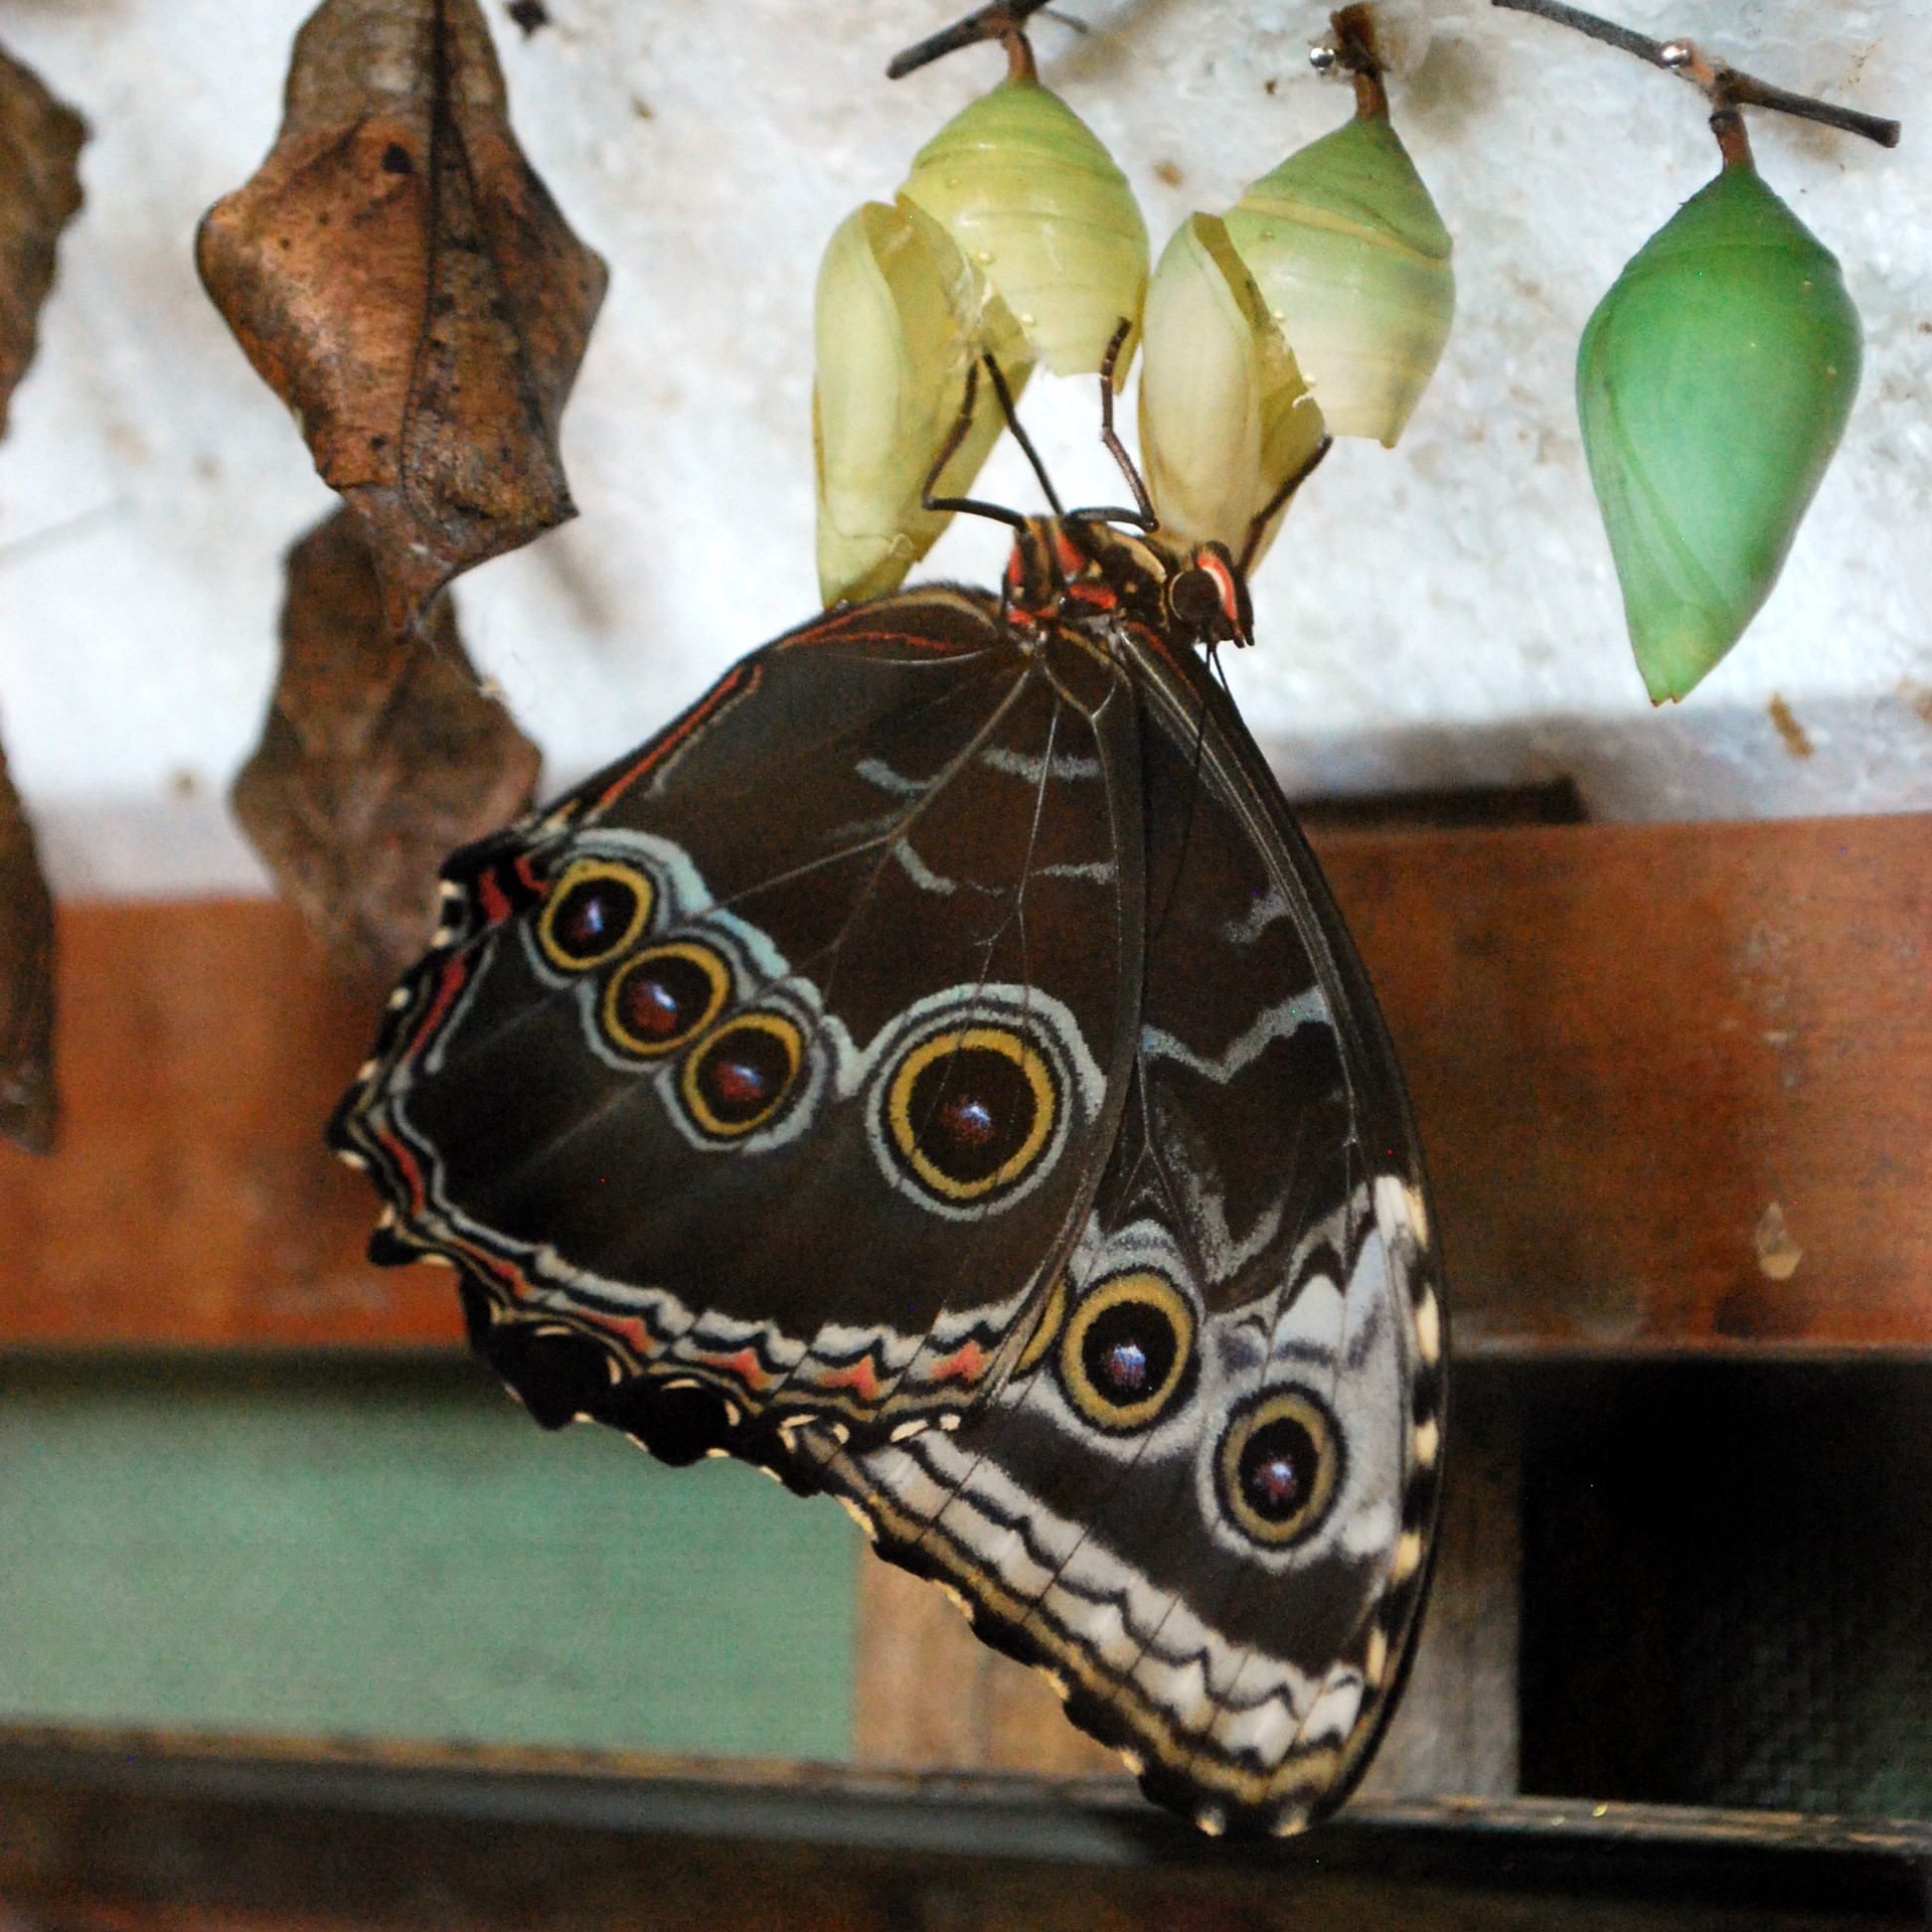 Butterfly that recently emerged from its chrysalis